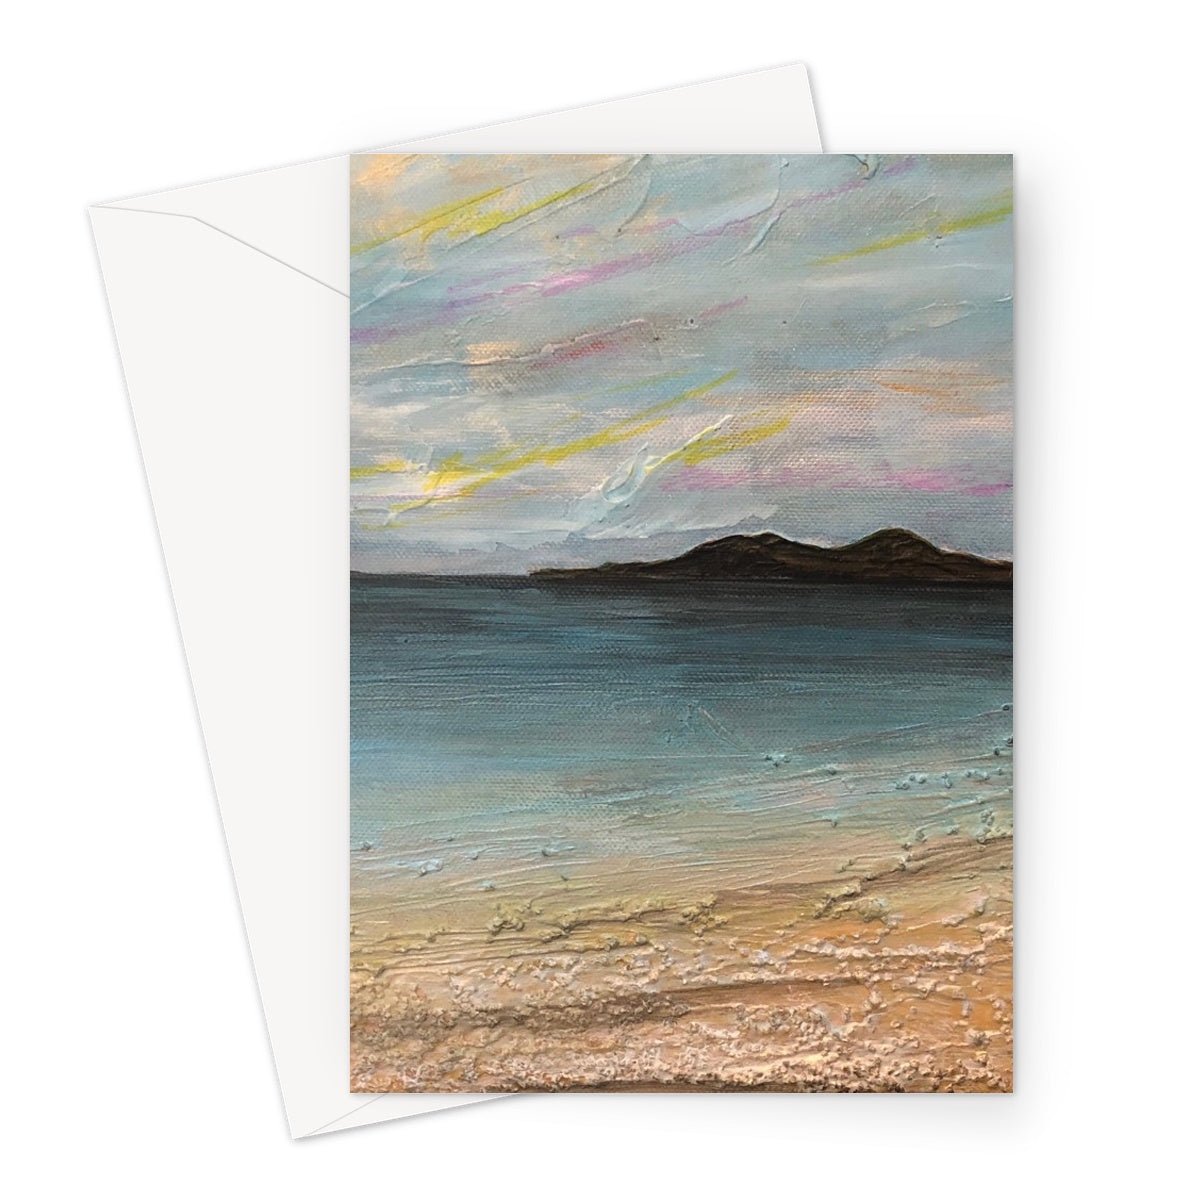 Garrynamonie Beach South Uist Art Gifts Greeting Card-Greetings Cards-Hebridean Islands Art Gallery-A5 Portrait-10 Cards-Paintings, Prints, Homeware, Art Gifts From Scotland By Scottish Artist Kevin Hunter